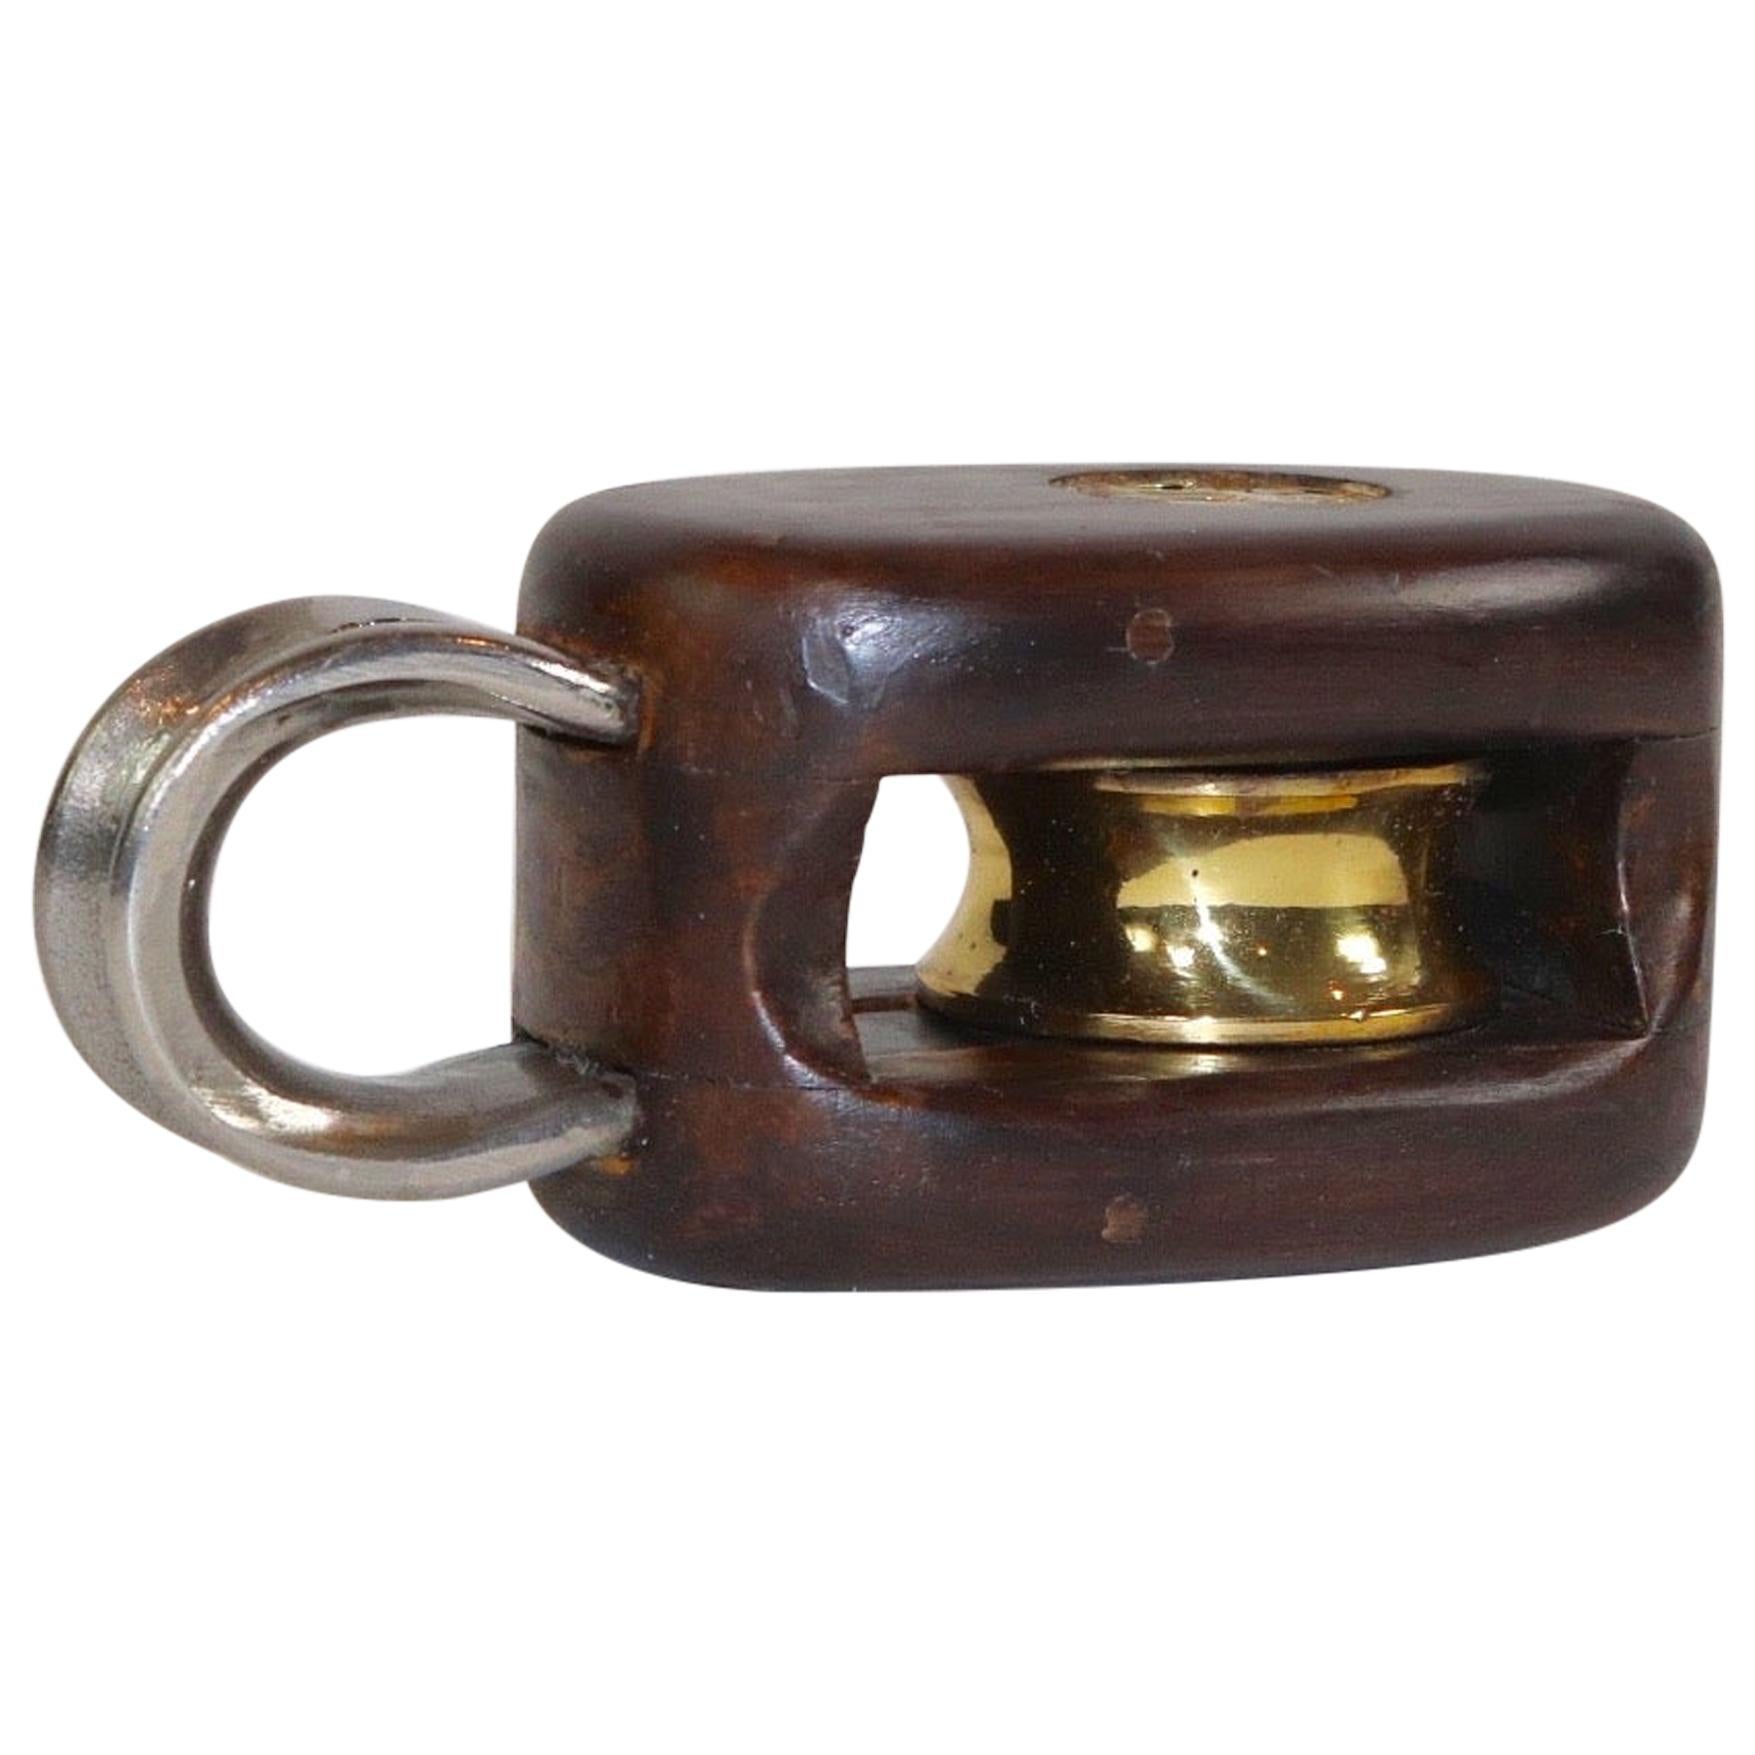 Merriman Brothers Yacht Pulley For Sale